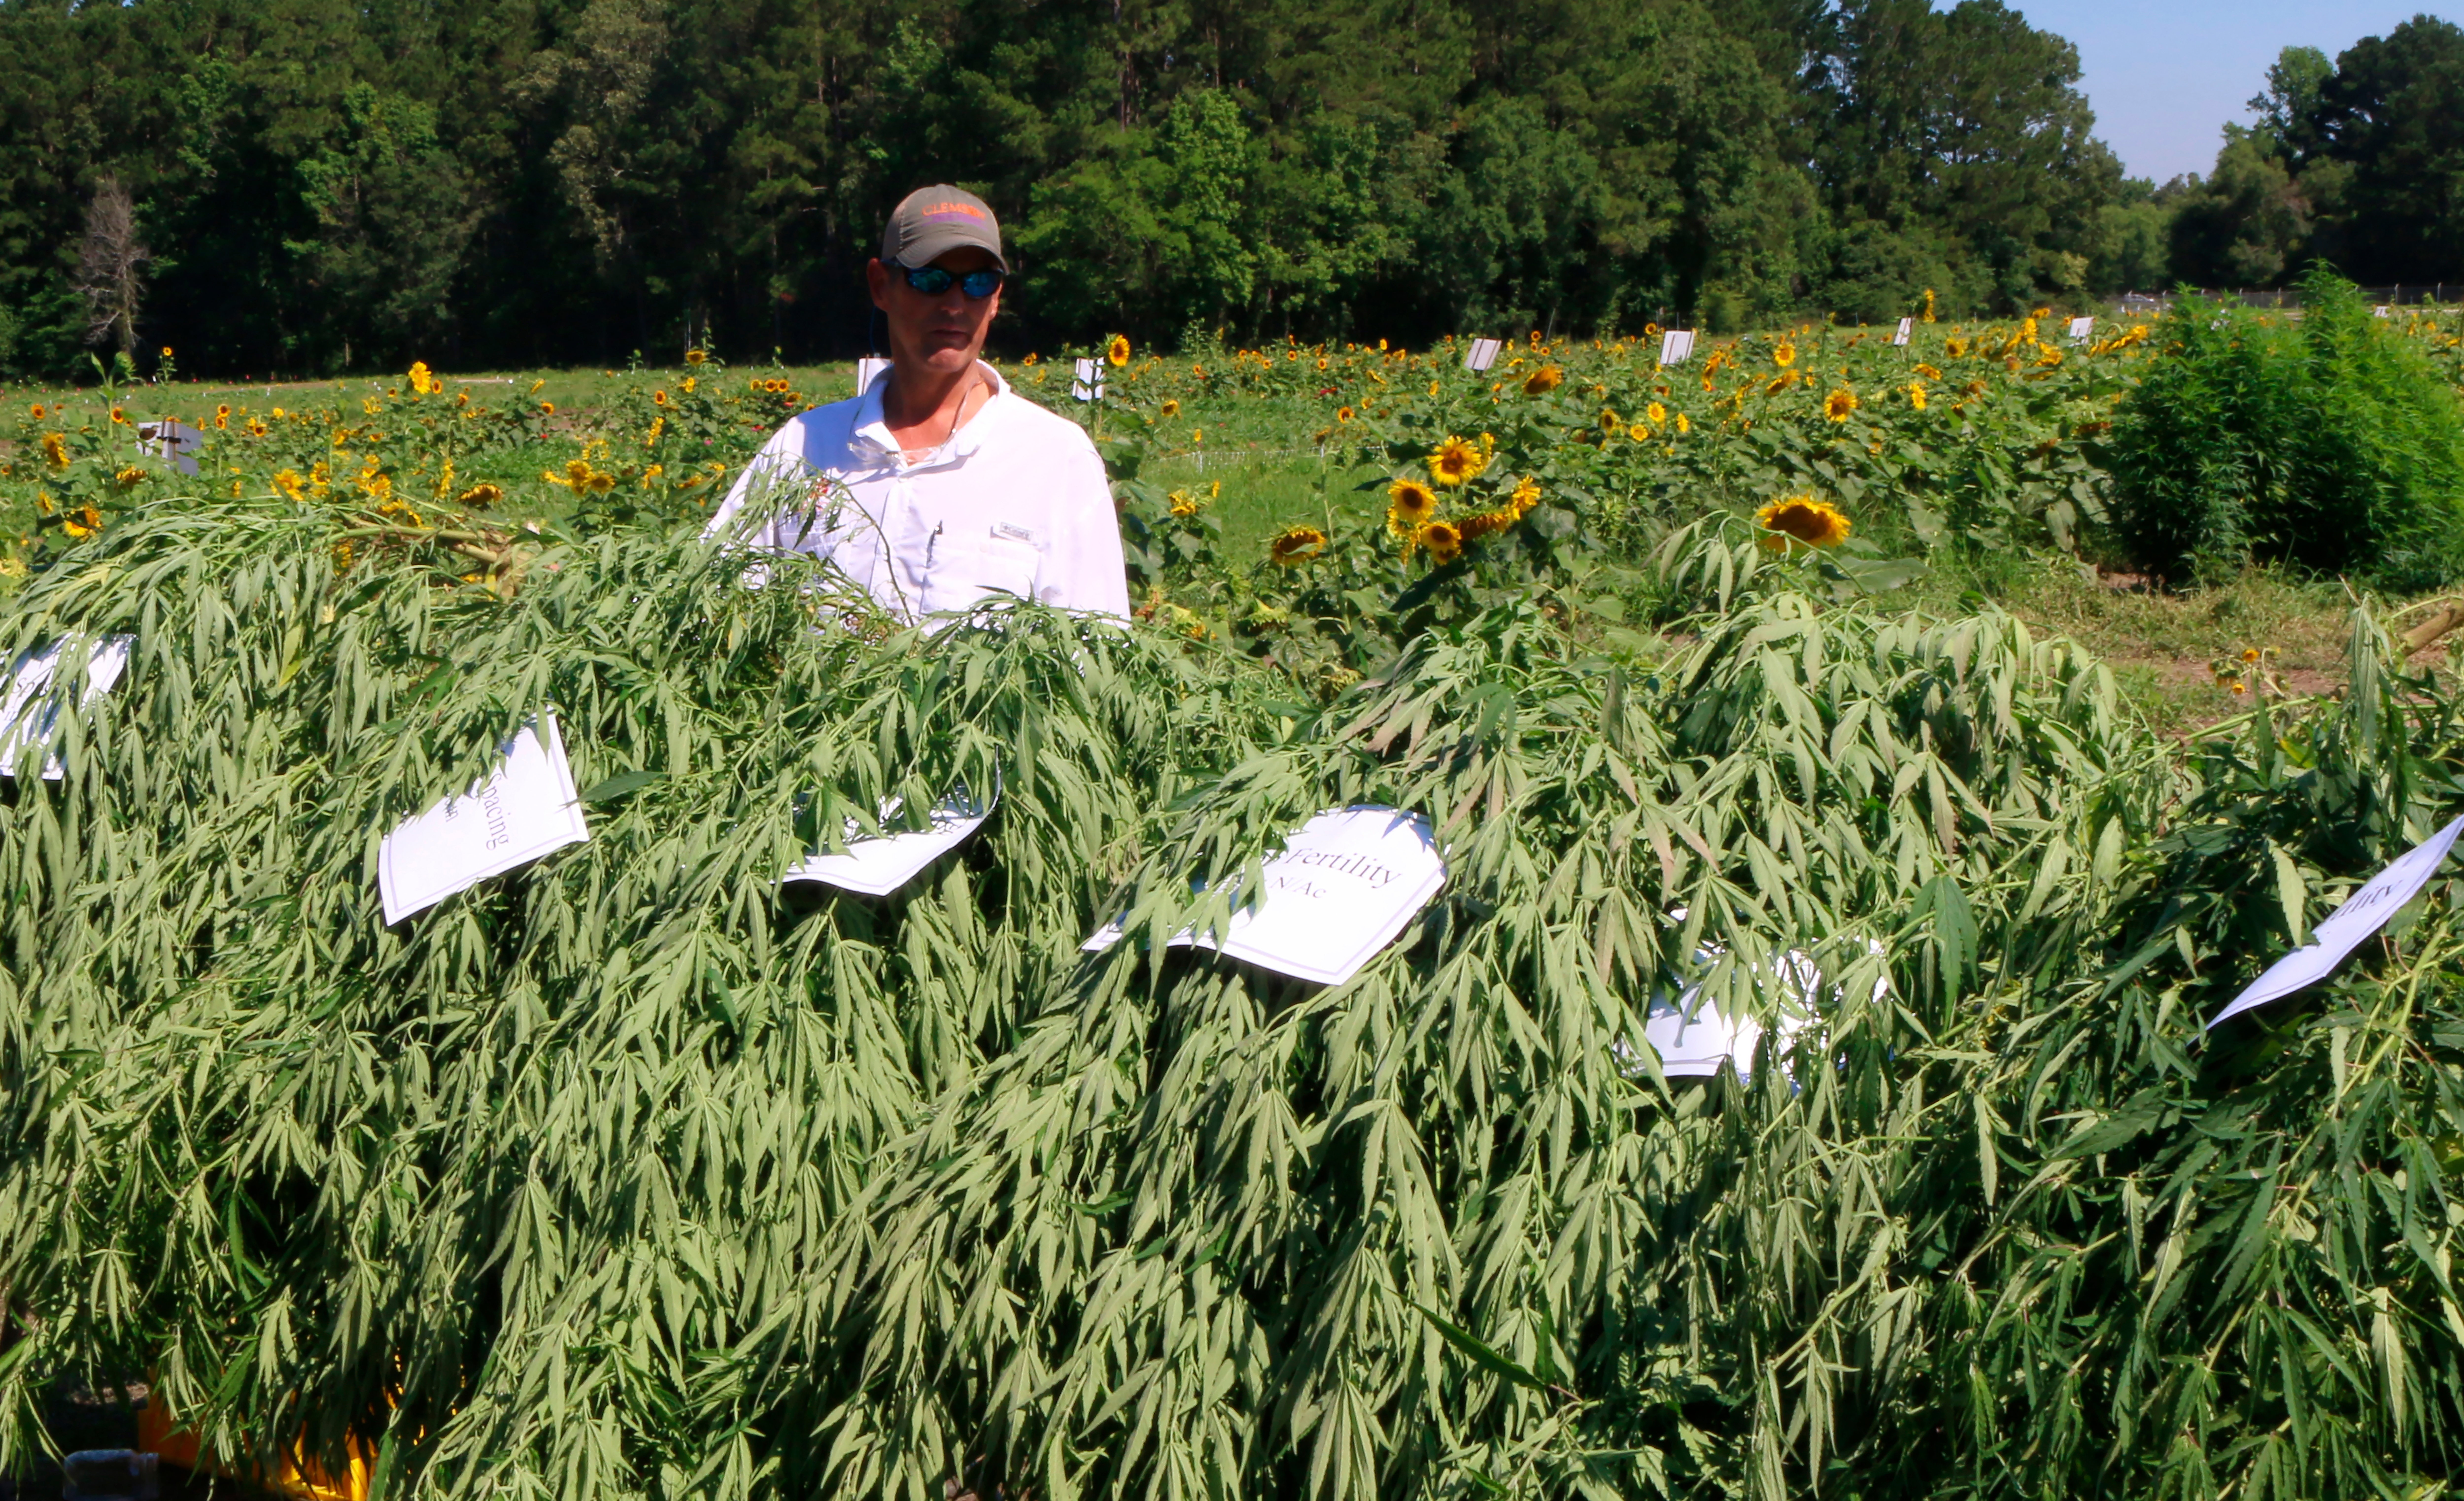 Brian Ward, an organic vegetable specialist and assistant professor at the Coastal Research and Education Center (REC), gave an update on the South Carolina hemp crop during a recent field day.